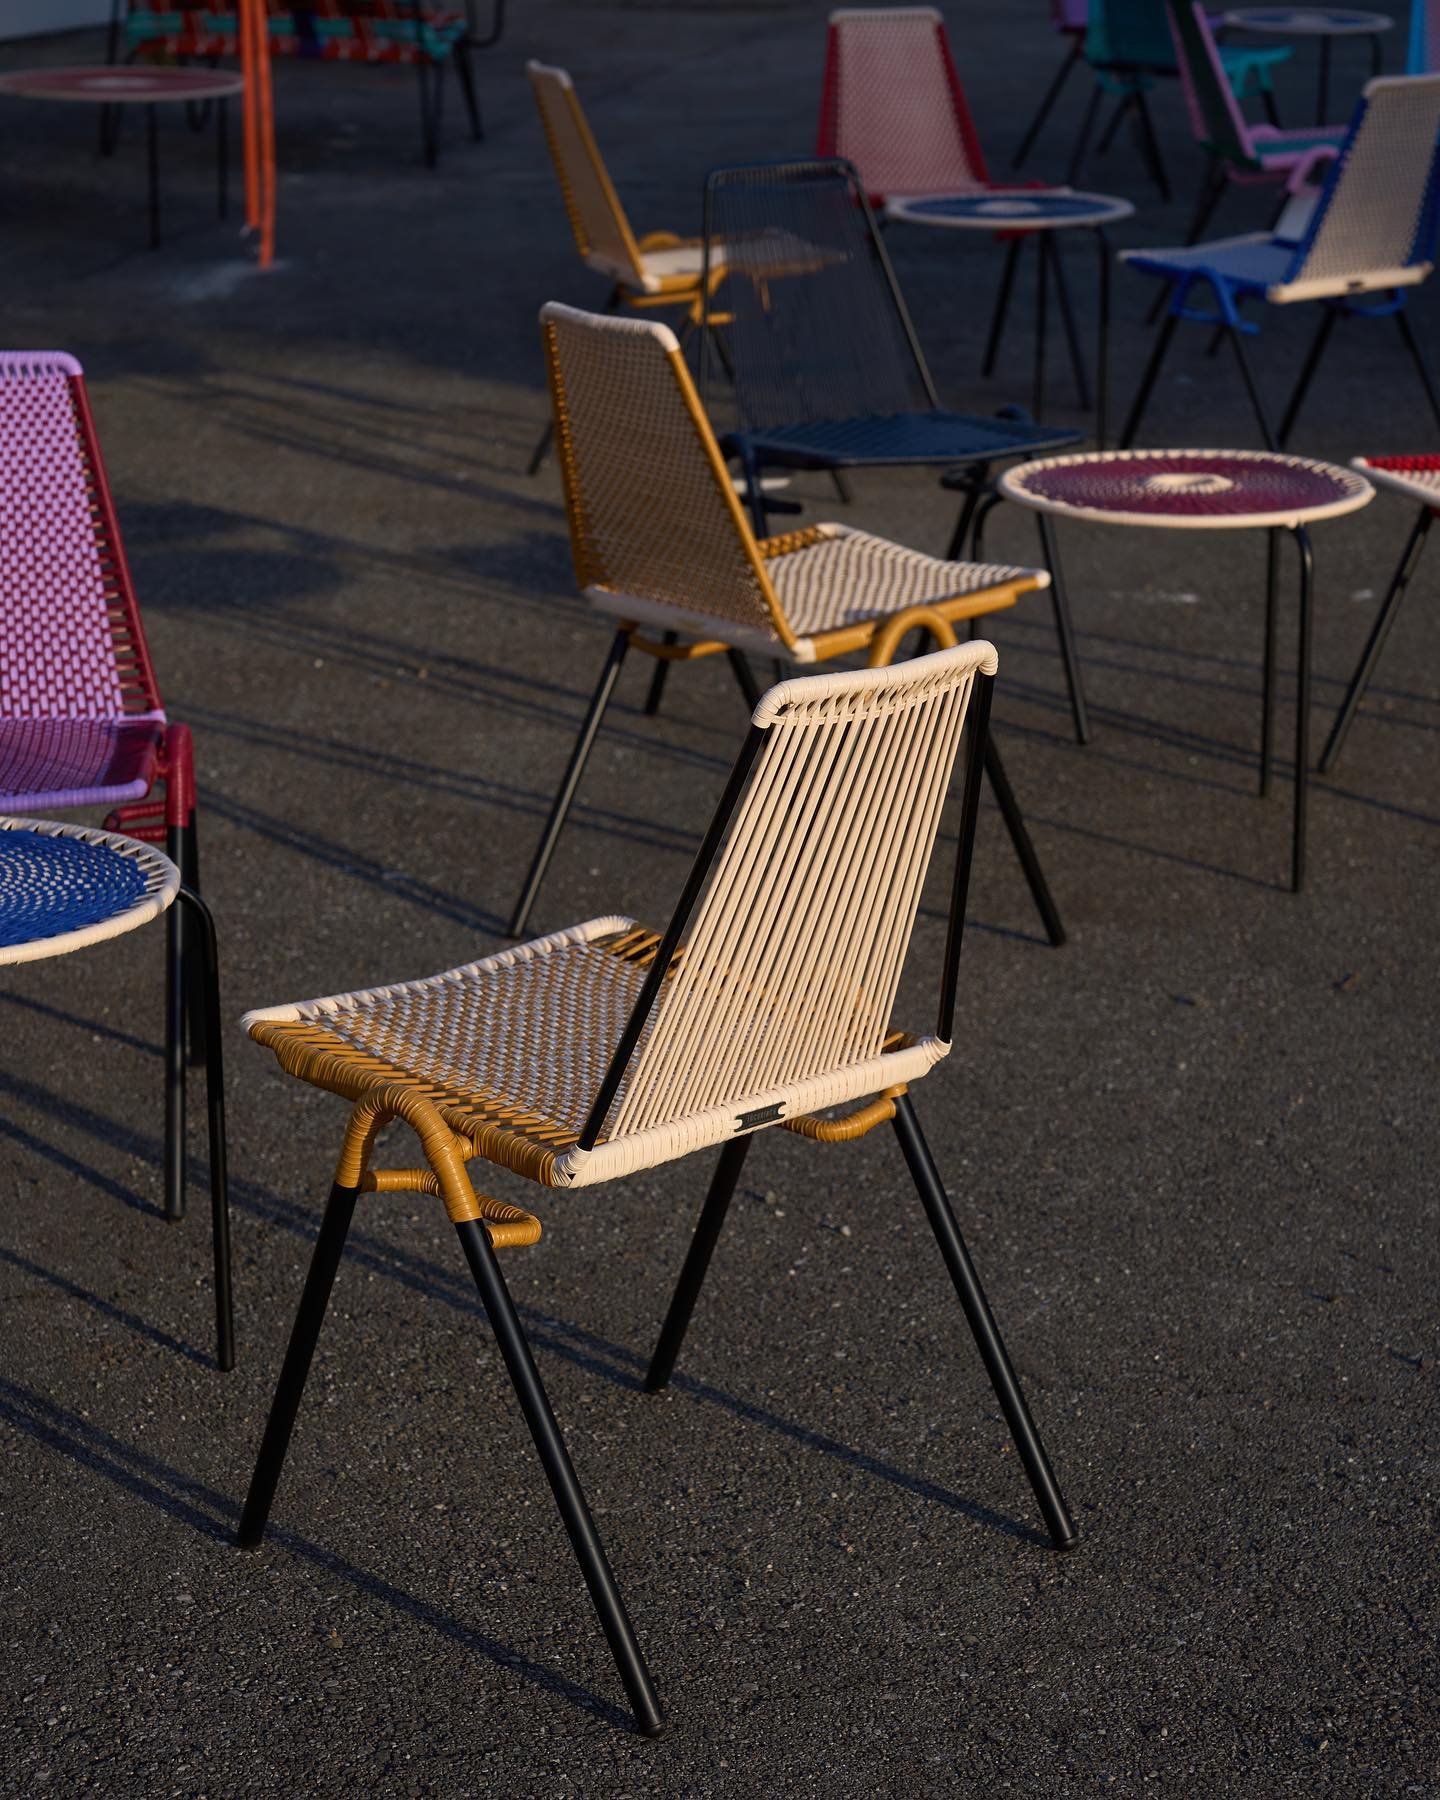 Day and night! 🌝 🌚 #omarcity #tucurinca #delafinca #ap&eacute;rotime #moonlightdancing #diningchairs #diningchair #milanodesignweek2024 #baranzate #outdoorfurniture #outdoorfurnituredesign #handmade #woven #wovenfurniture #wovendesign #sustainabled